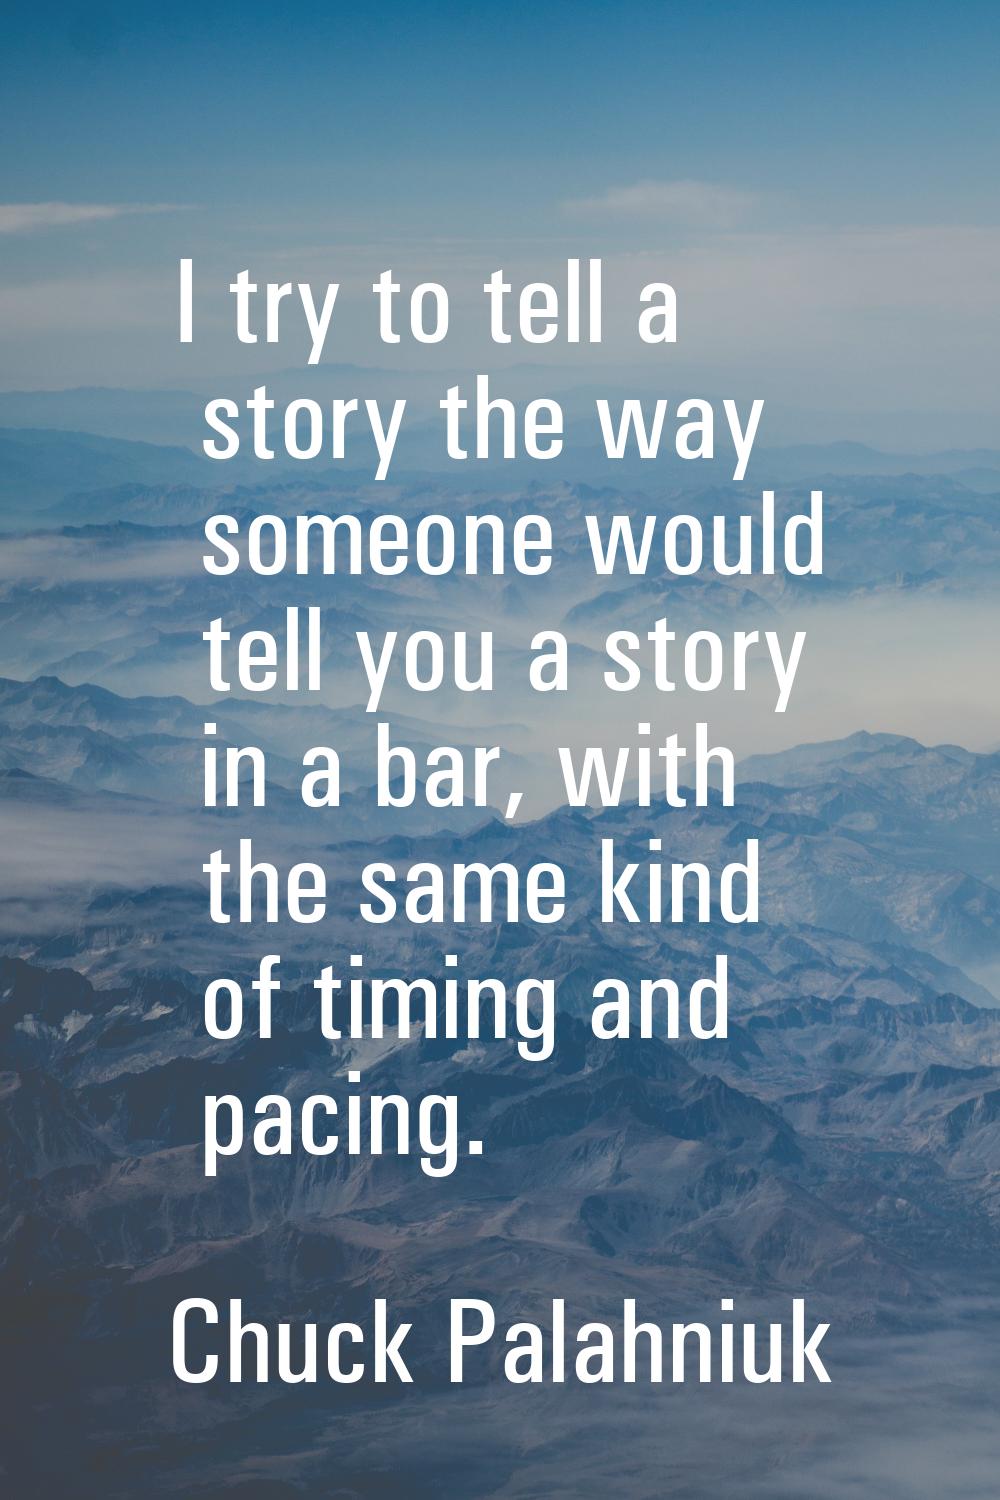 I try to tell a story the way someone would tell you a story in a bar, with the same kind of timing